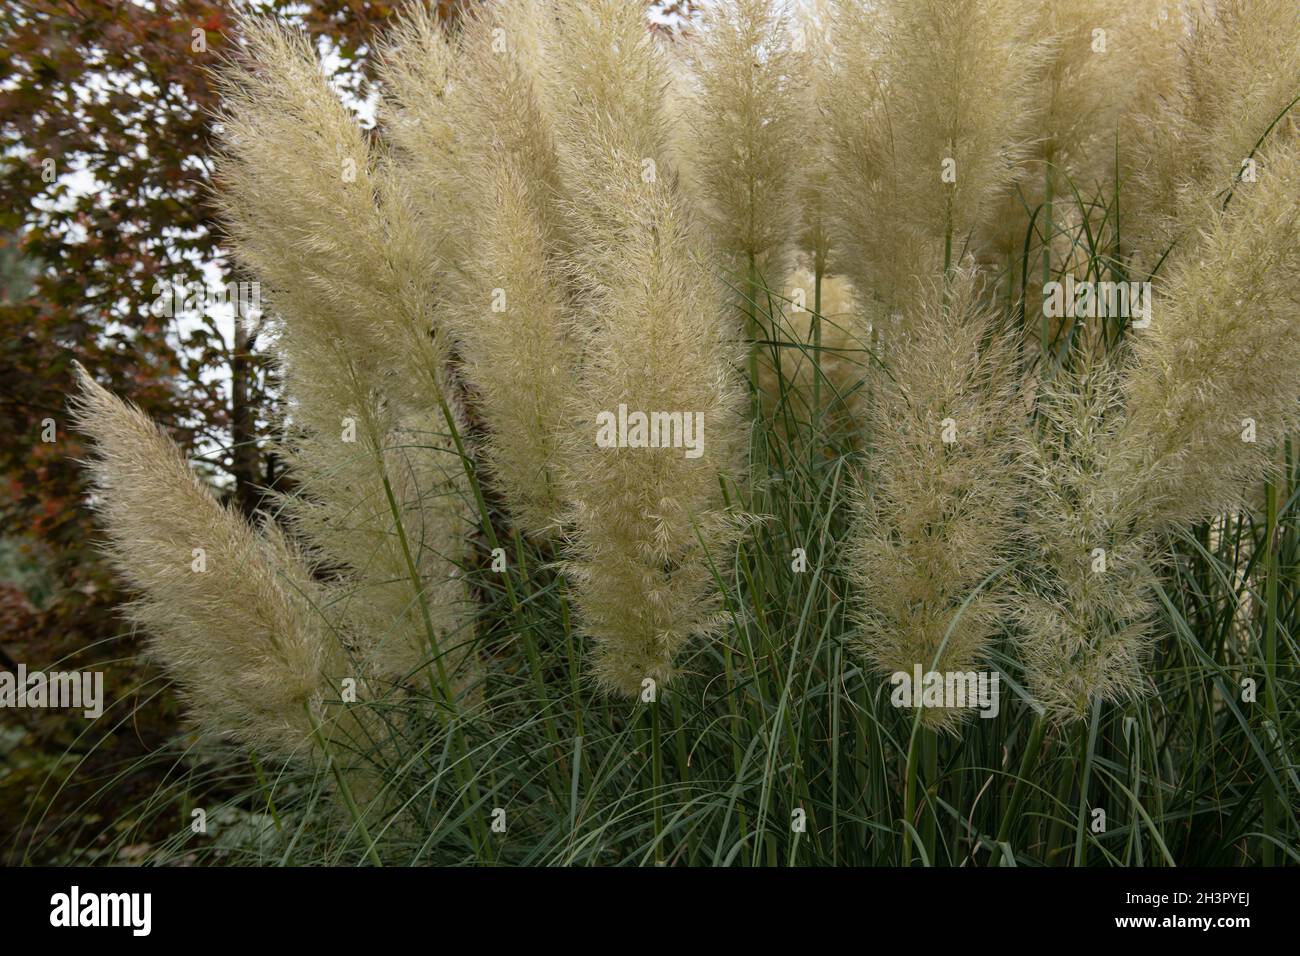 Close Up of the Autumn Feathery Cream Flower Heads on a Pampas Grass Plant (Cortaderia selloana) Growing in a Herbaceous Border in a Cottage Garden Stock Photo